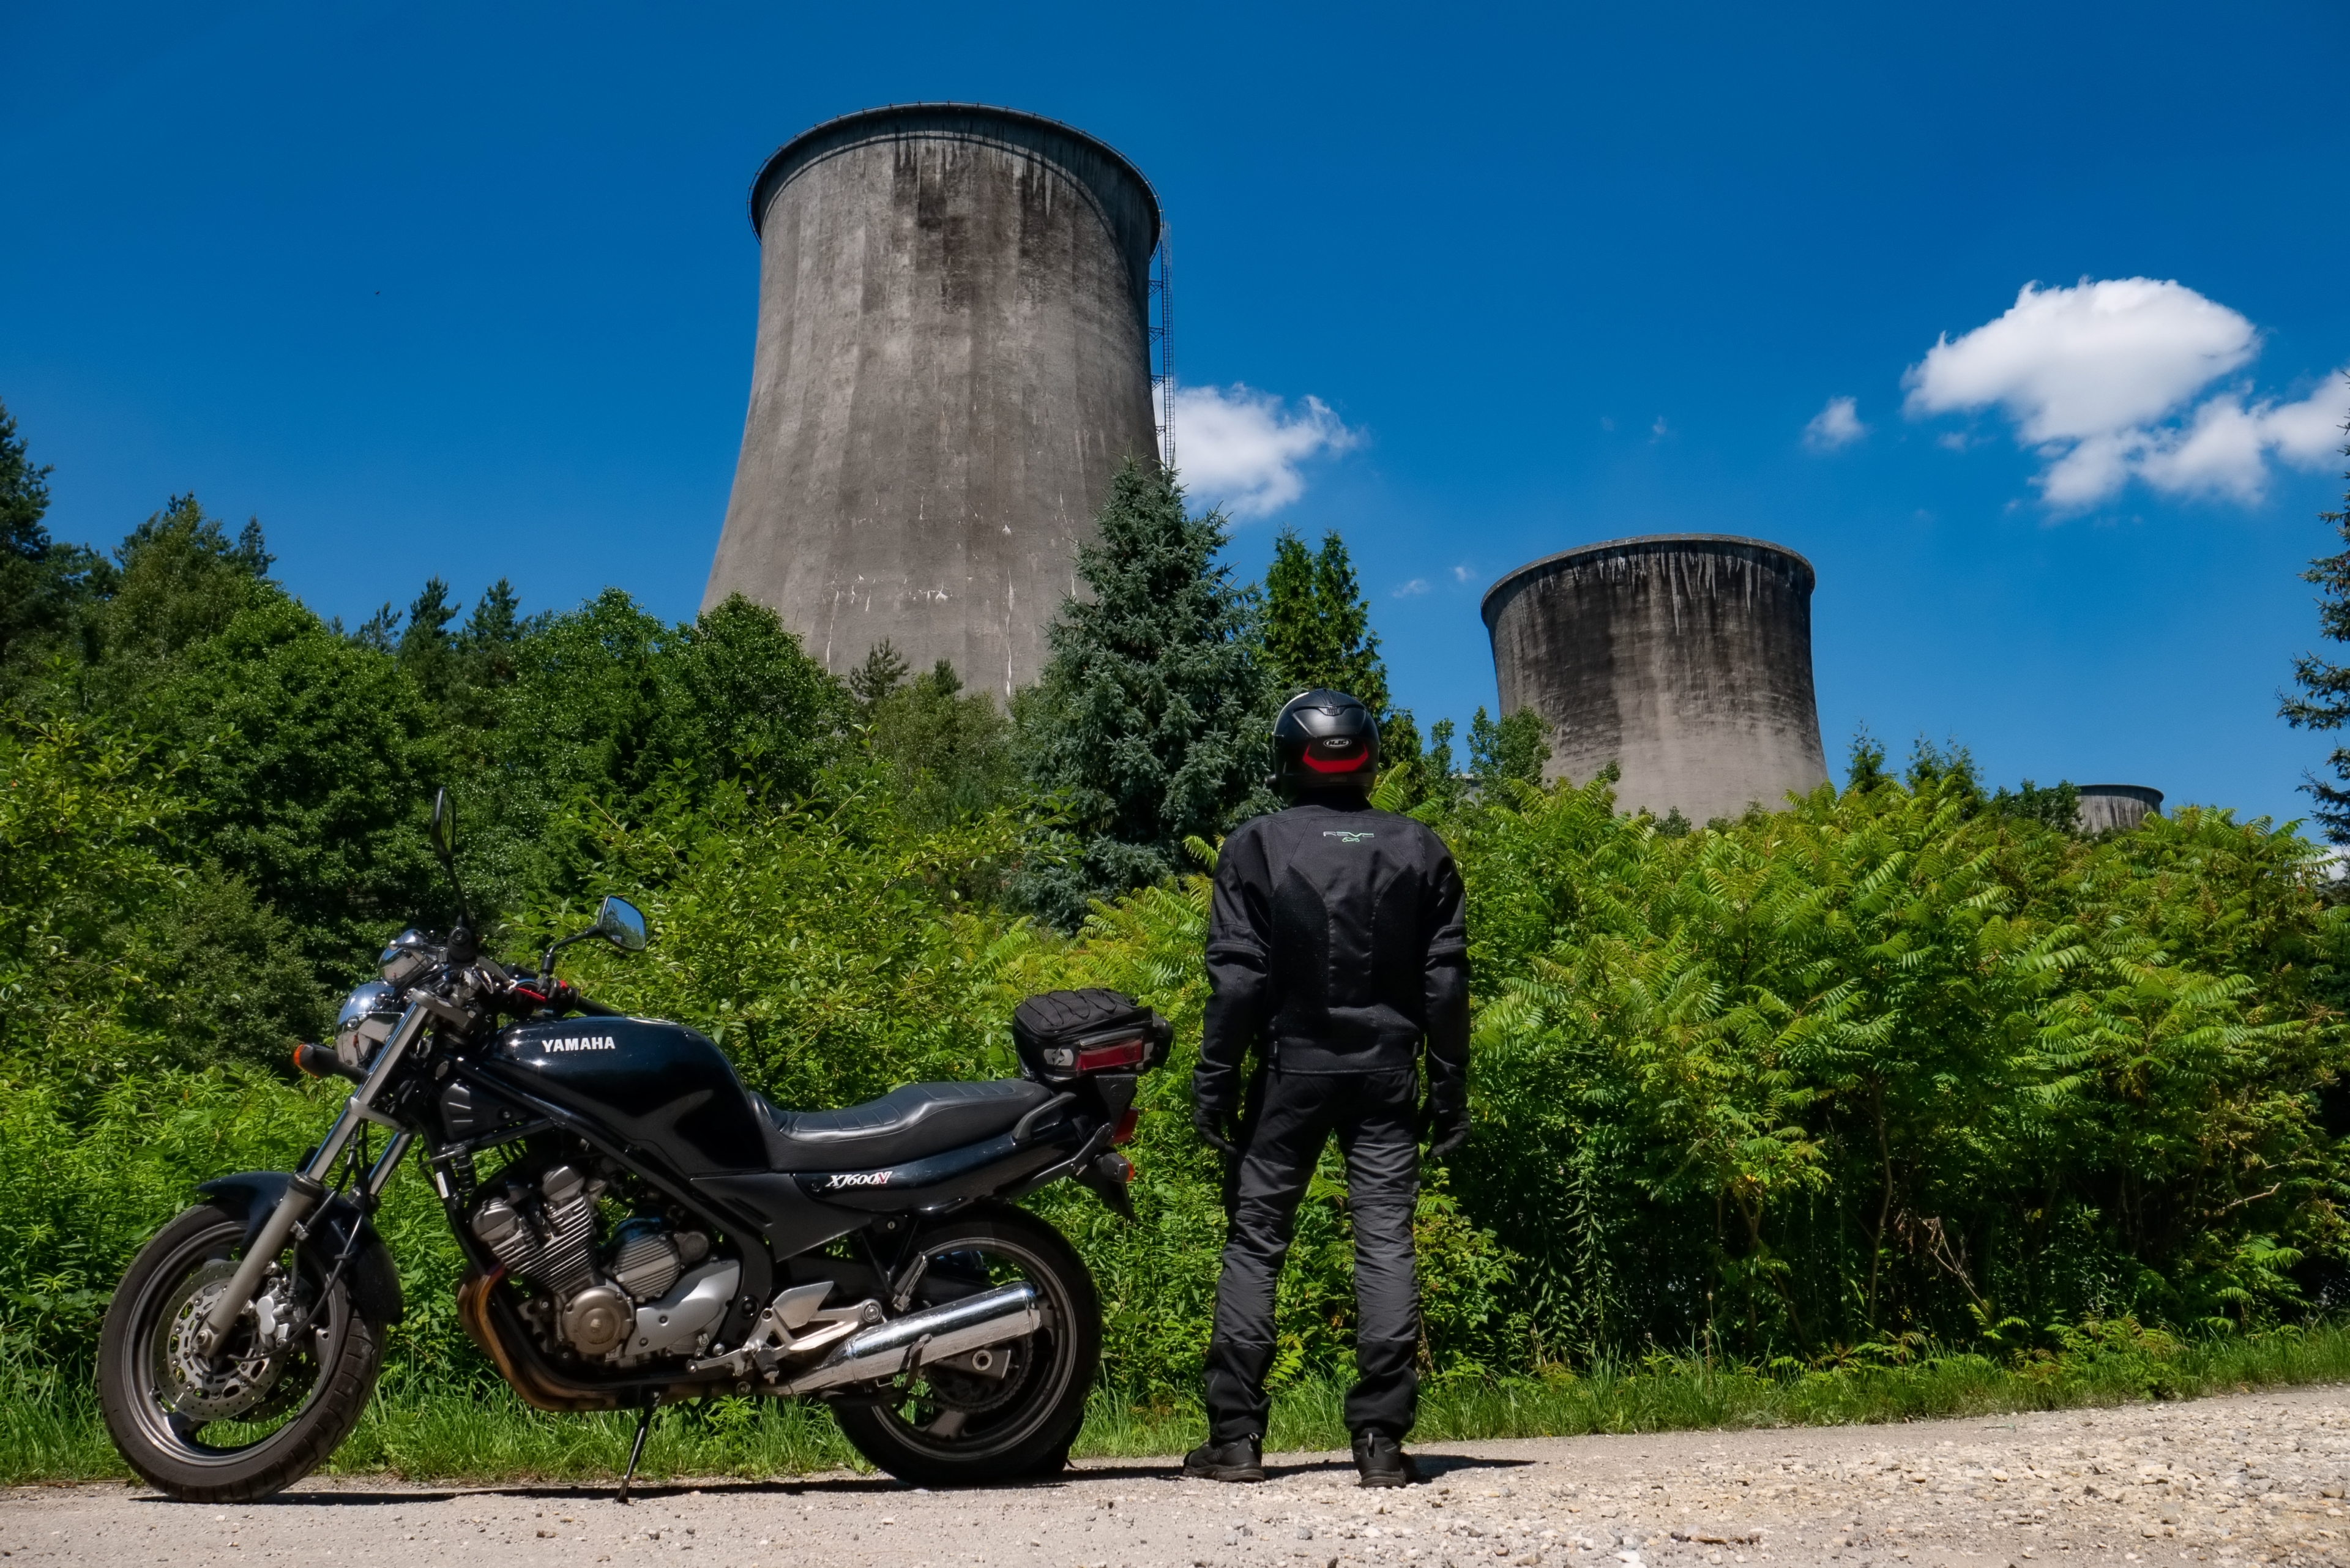 People 3840x2562 motorcycle Yamaha Poland forest industrial cooling towers Japanese motorcycles sky standing helmet side view vehicle trees clouds ground